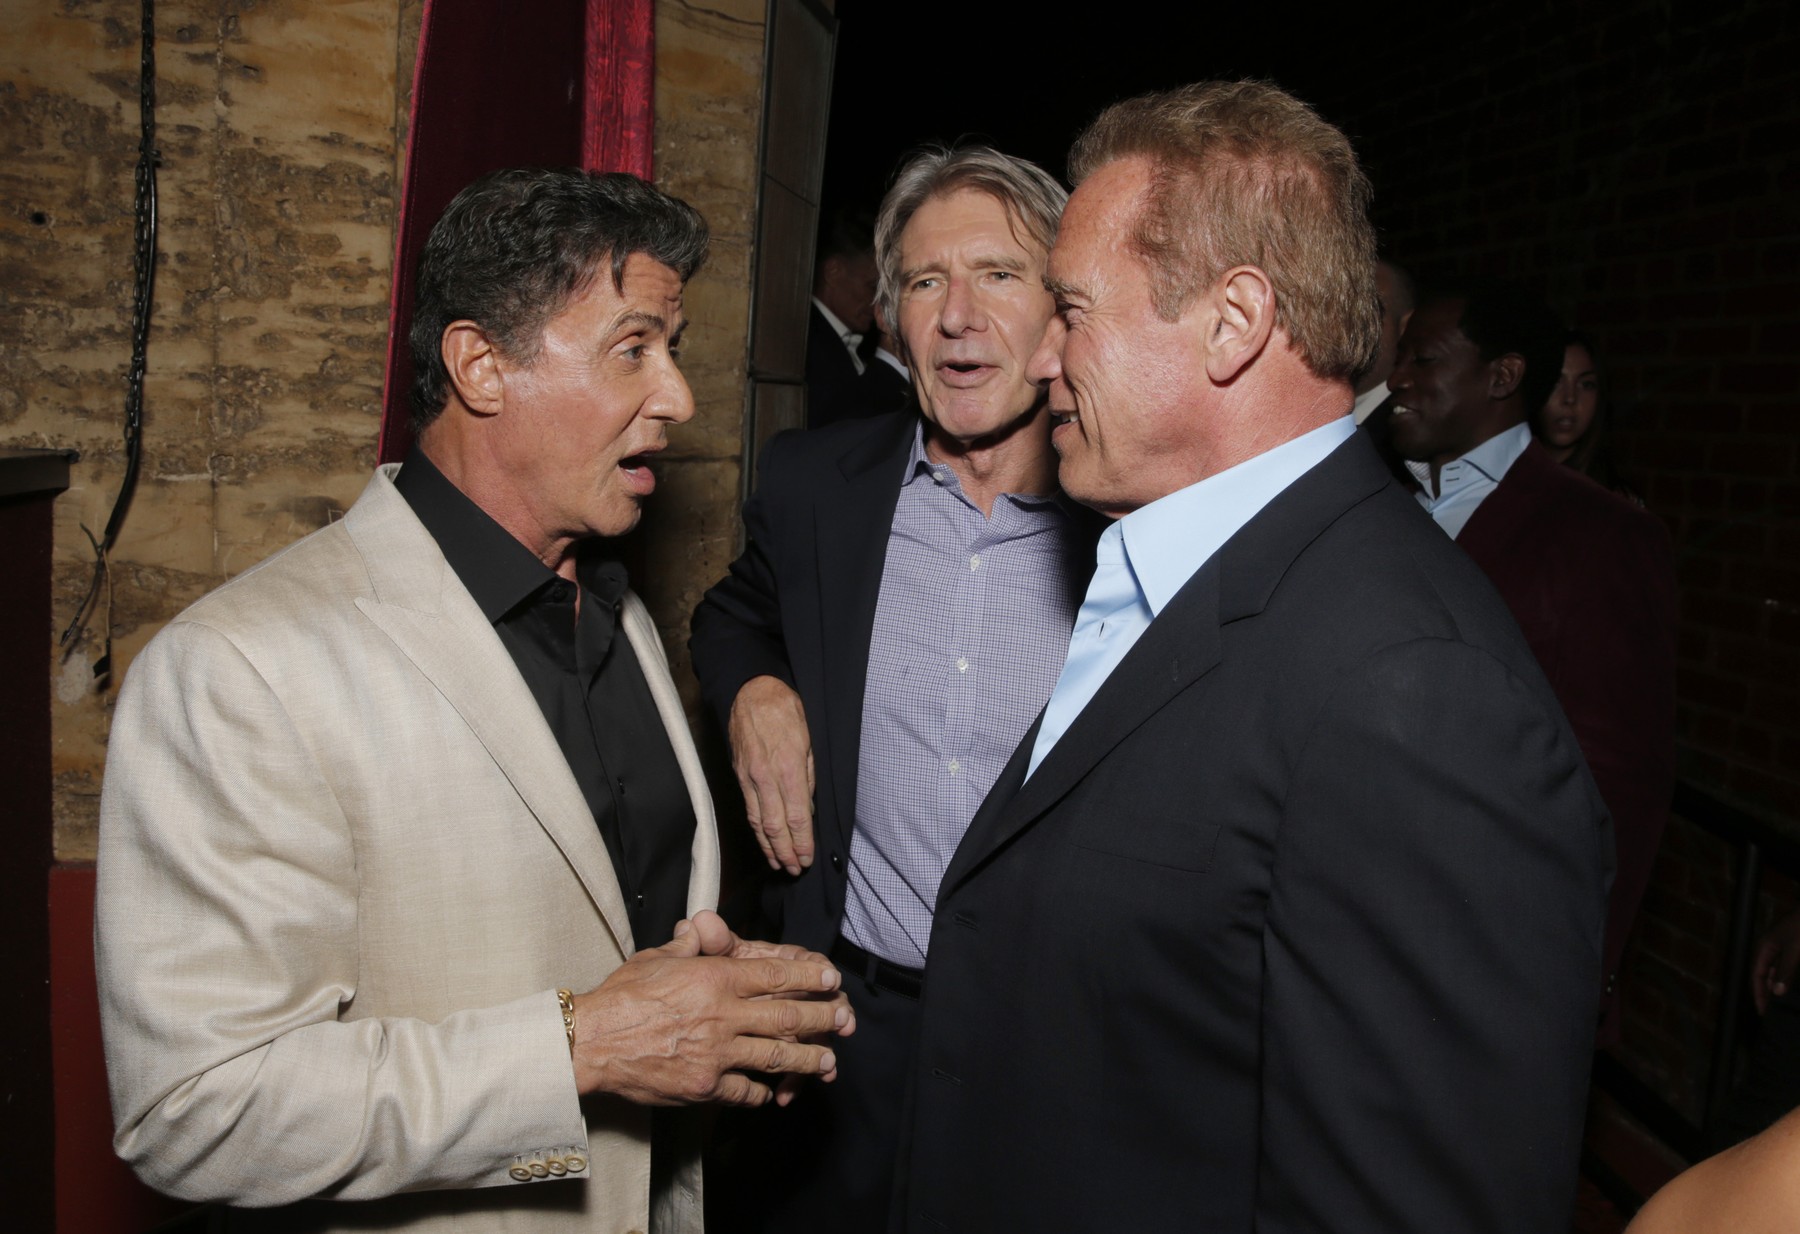 Arnold Schwarzenegger pursued Stallone, and a huge scandal broke out between the two muscle men